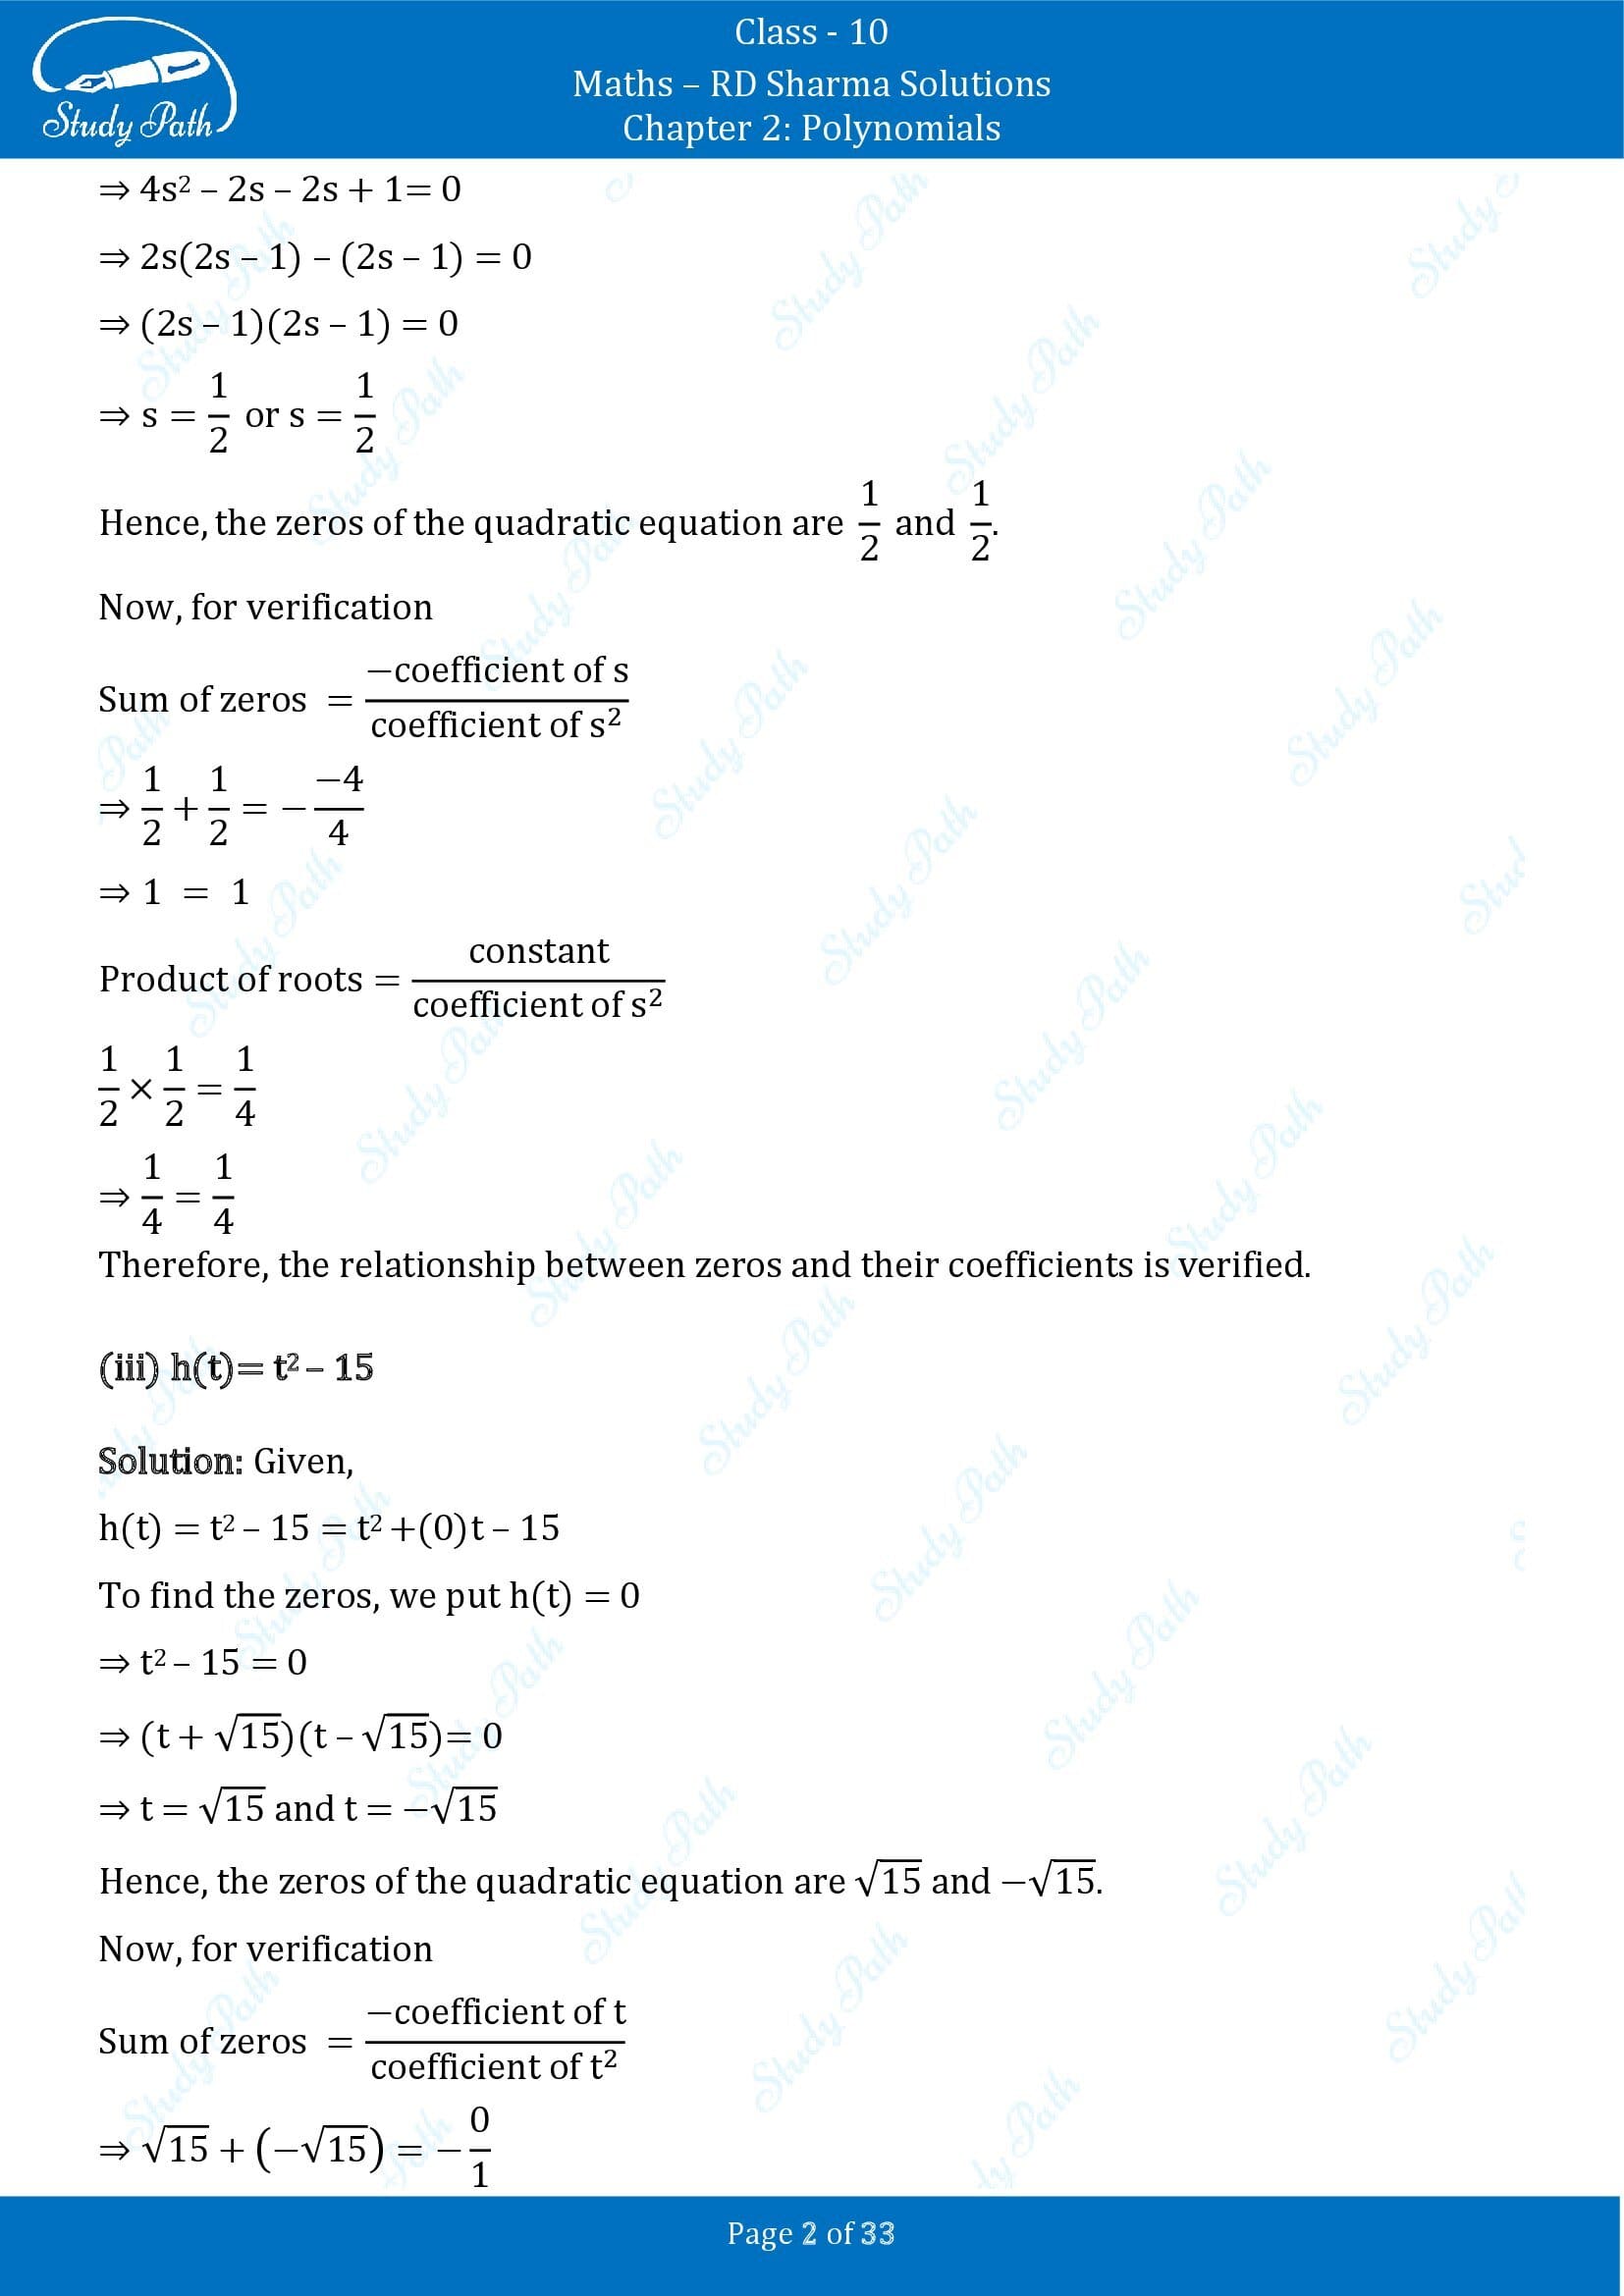 RD Sharma Solutions Class 10 Chapter 2 Polynomials Exercise 2.1 00002